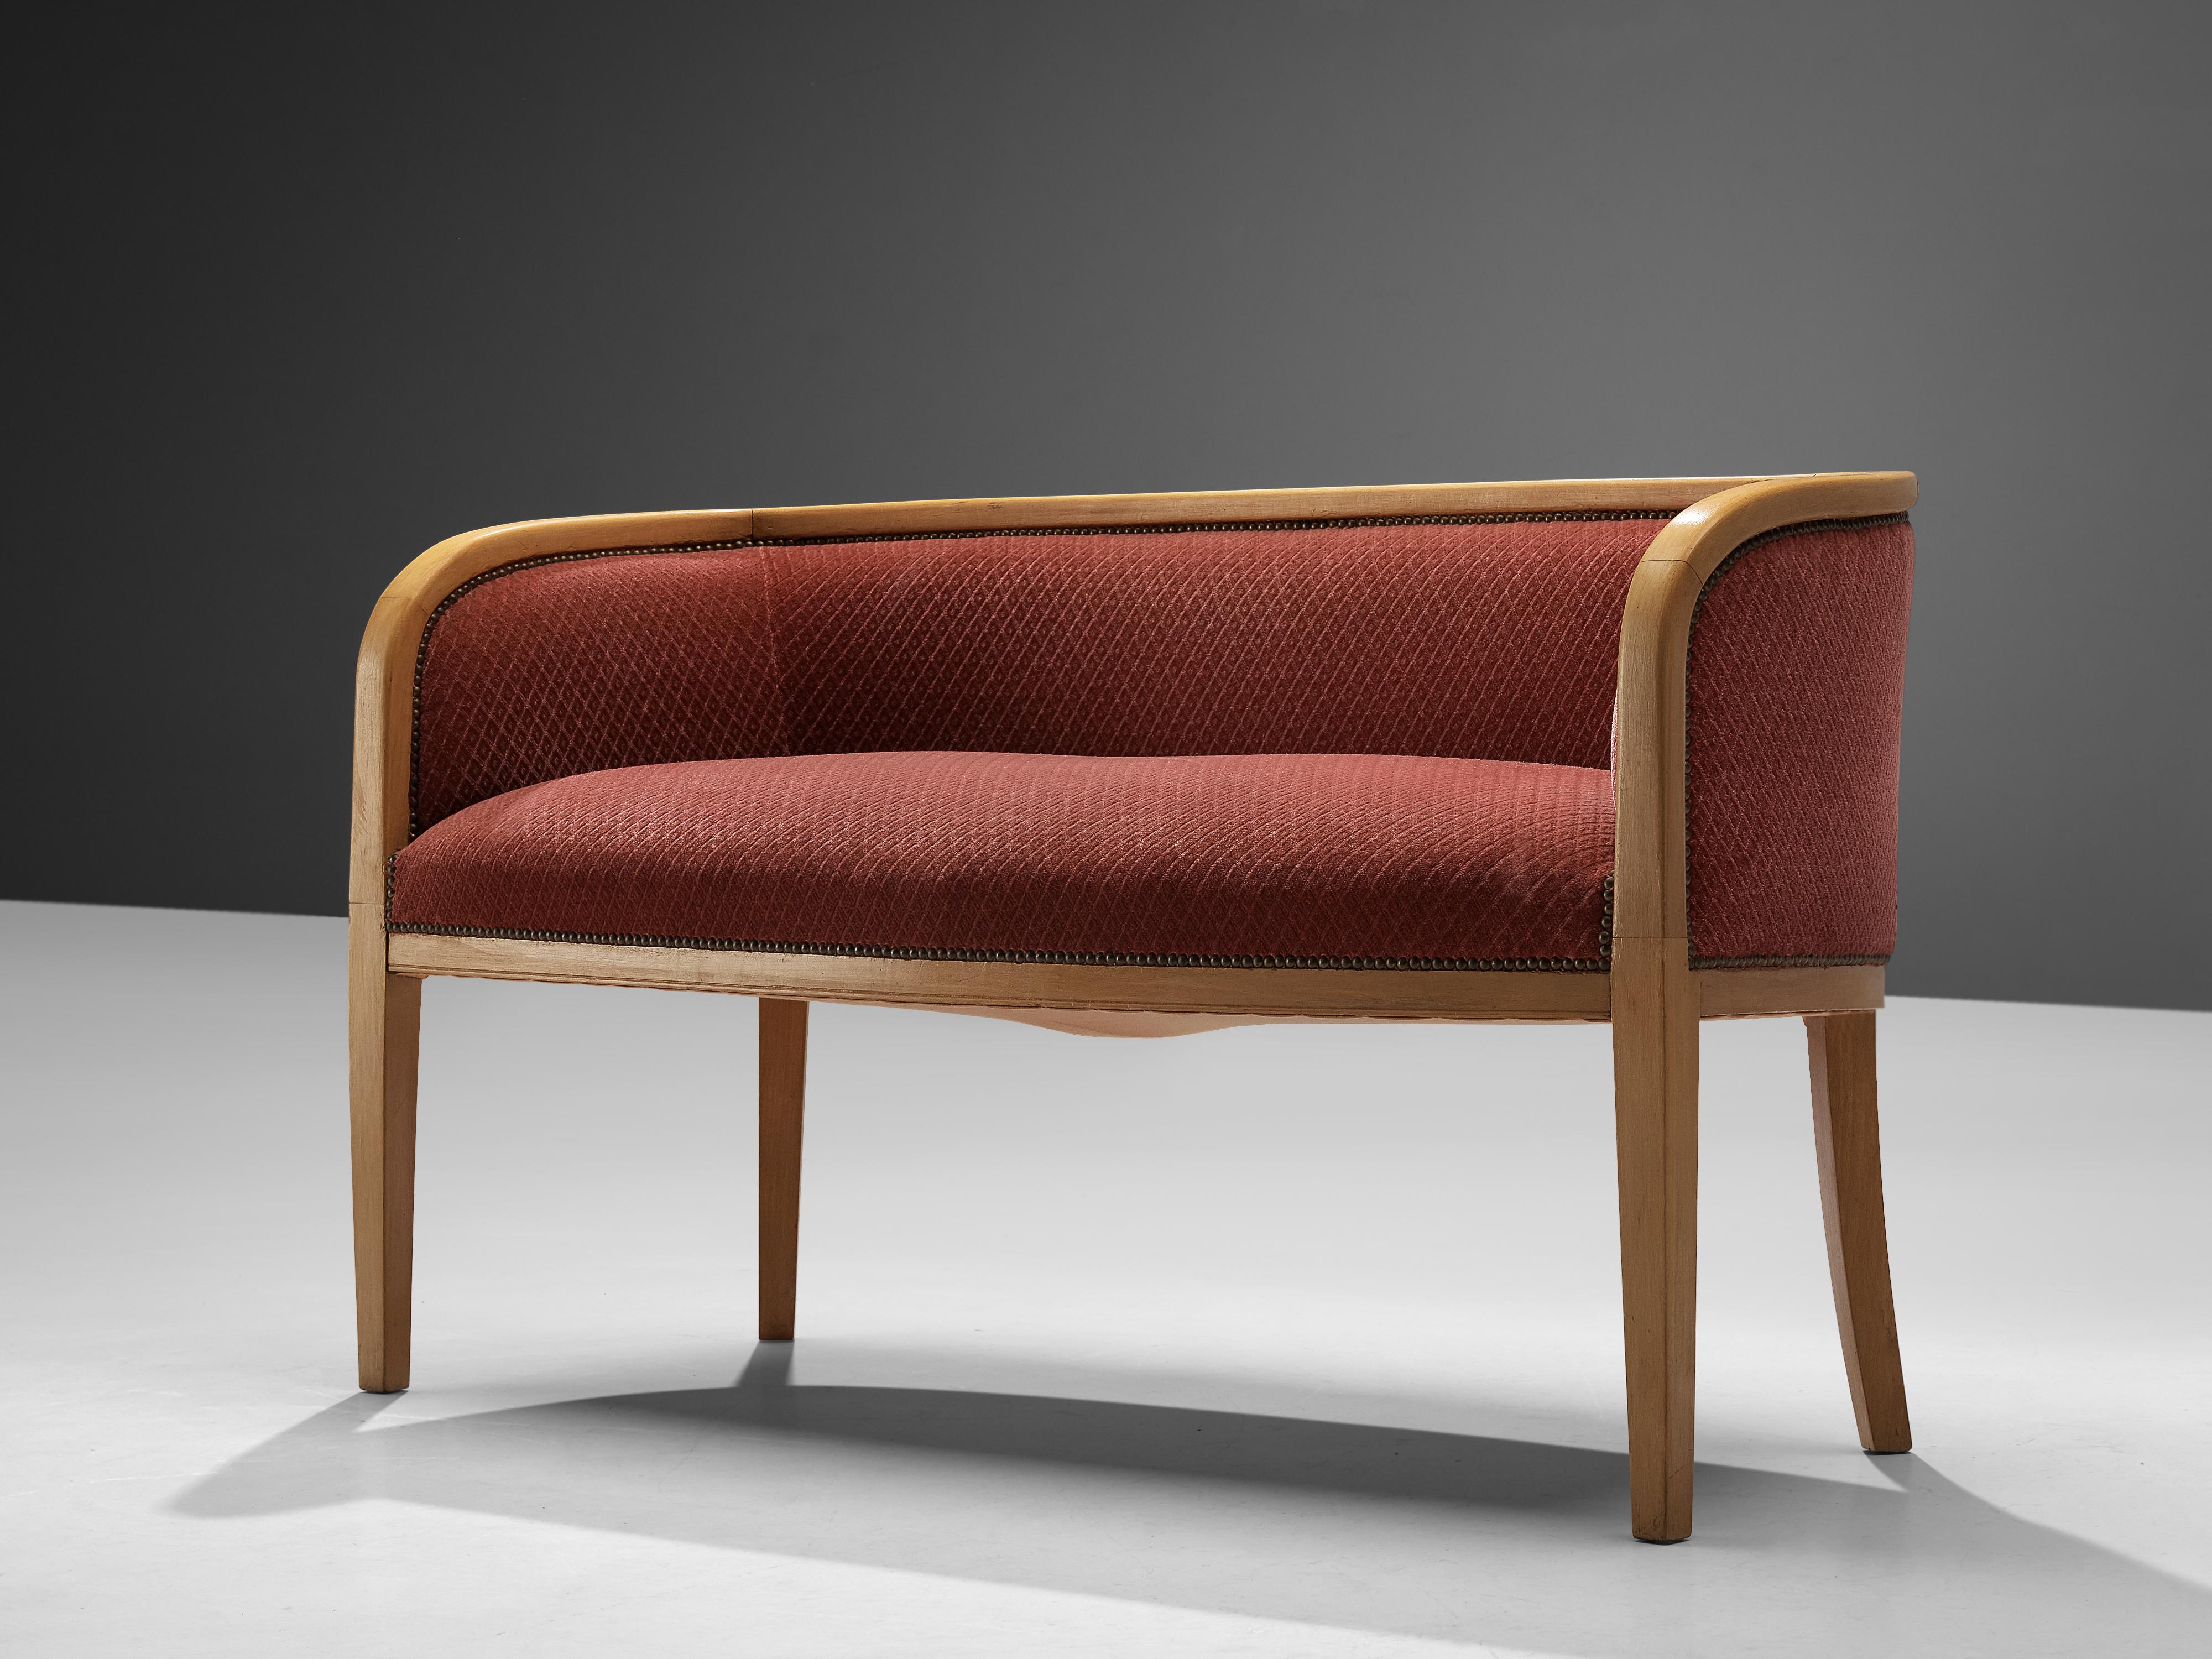 Sofa, fabric, brass, beech, Denmark, 1950s

A bright frame in beech wood curves around the seat and backrest. Both are upholstered in a soft pink fabric that is attached to the frame with brass nails. From the back, the sofa is showing the same kind